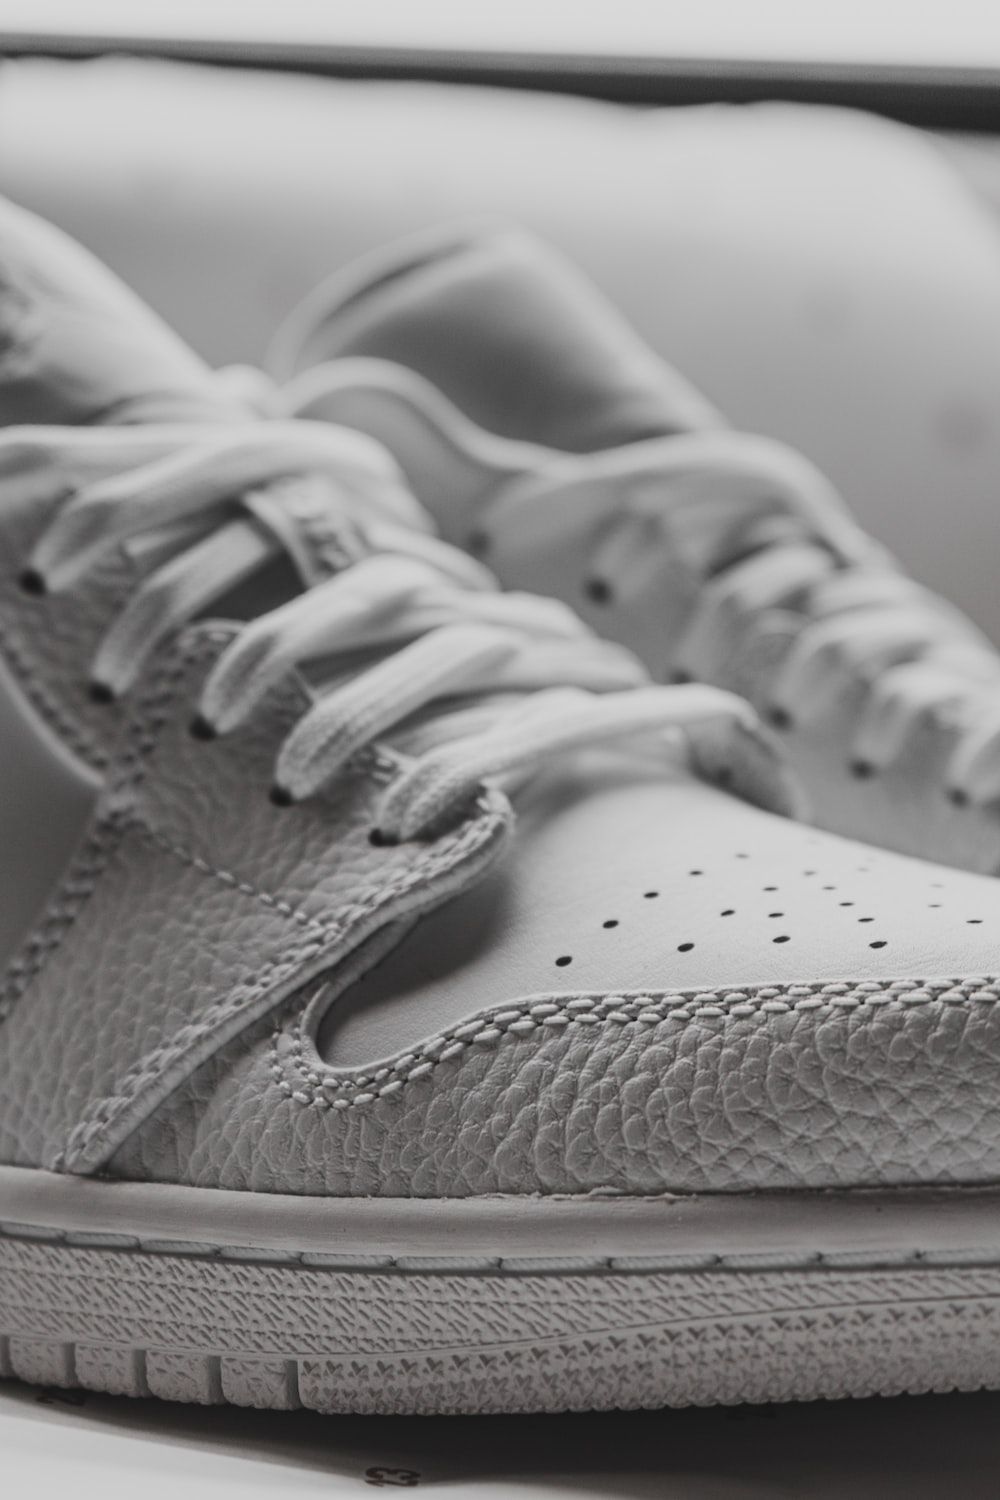 A pair of white sneakers with a textured toe cap - Air Jordan